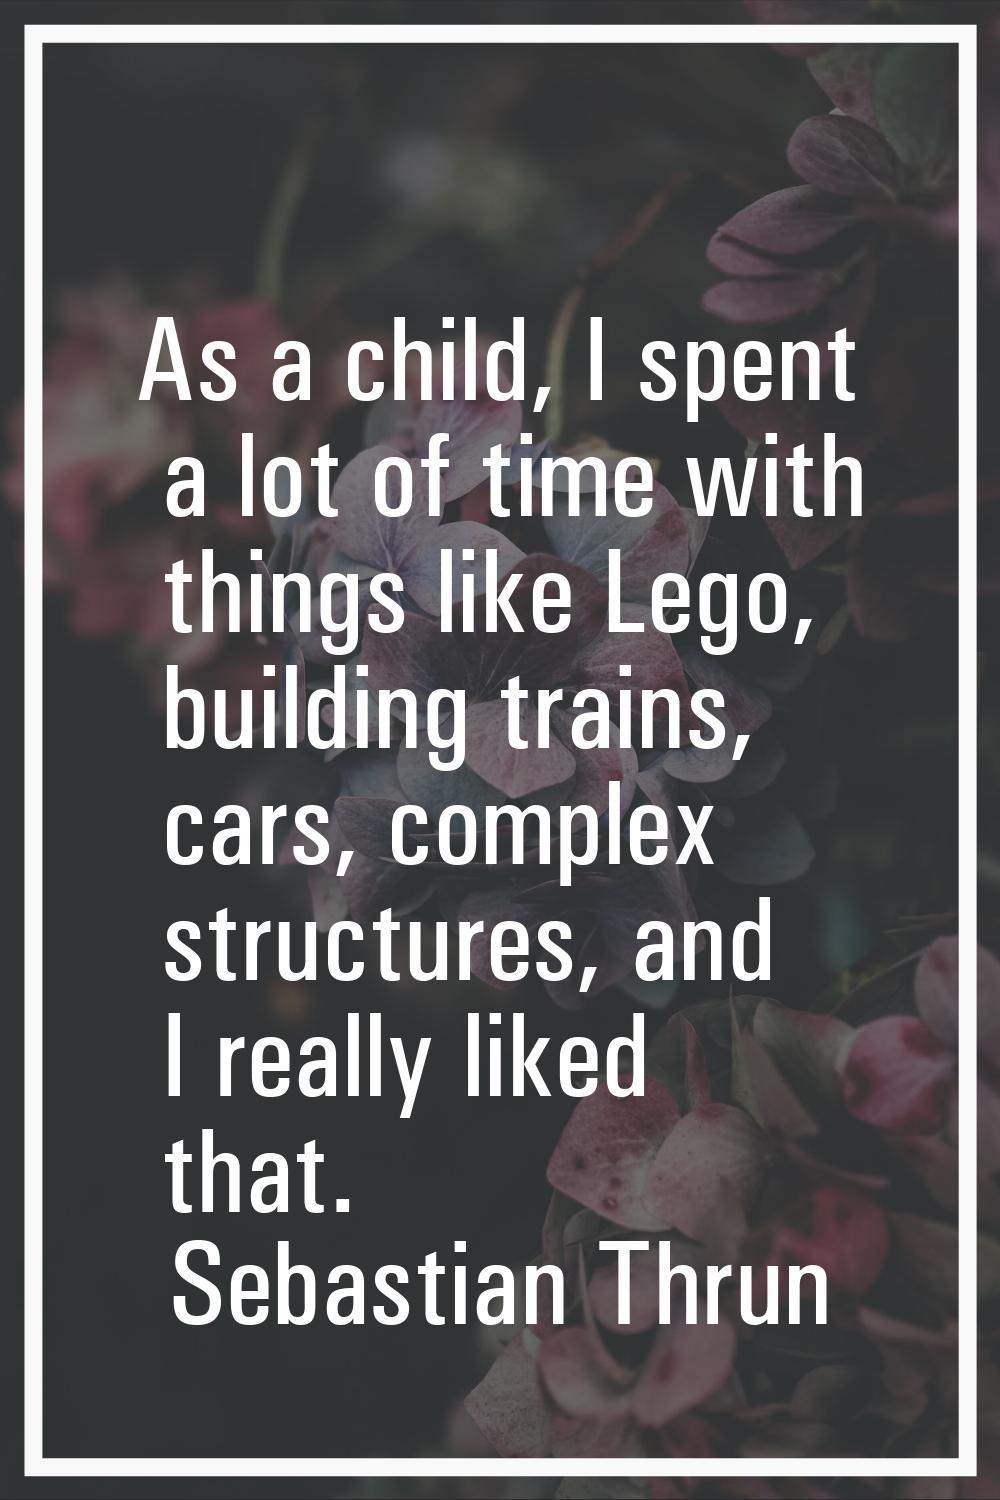 As a child, I spent a lot of time with things like Lego, building trains, cars, complex structures,